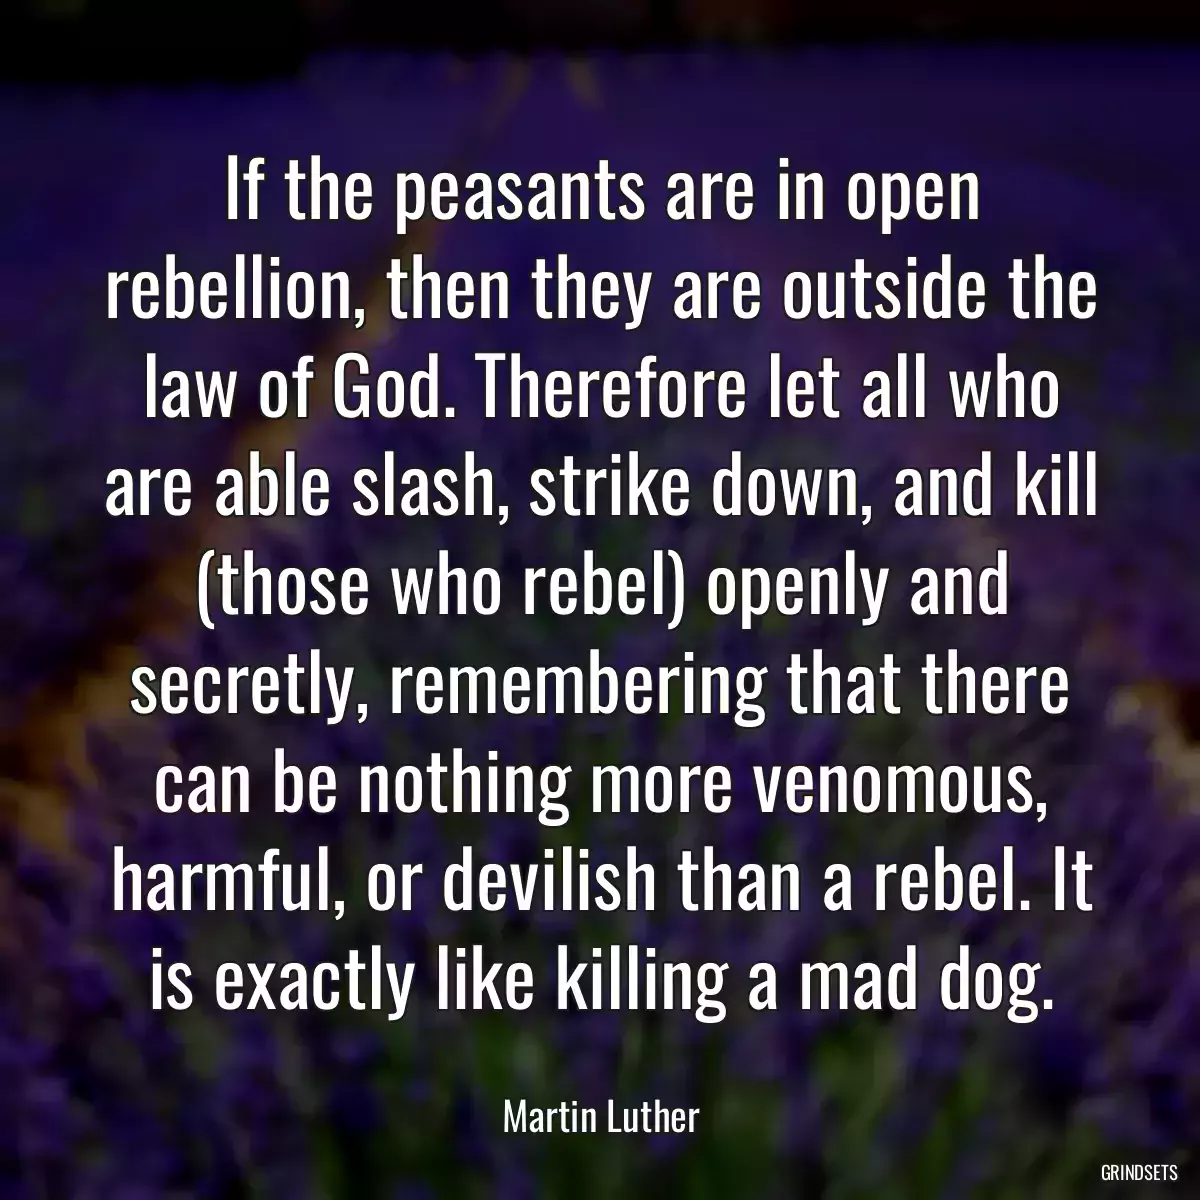 If the peasants are in open rebellion, then they are outside the law of God. Therefore let all who are able slash, strike down, and kill (those who rebel) openly and secretly, remembering that there can be nothing more venomous, harmful, or devilish than a rebel. It is exactly like killing a mad dog.